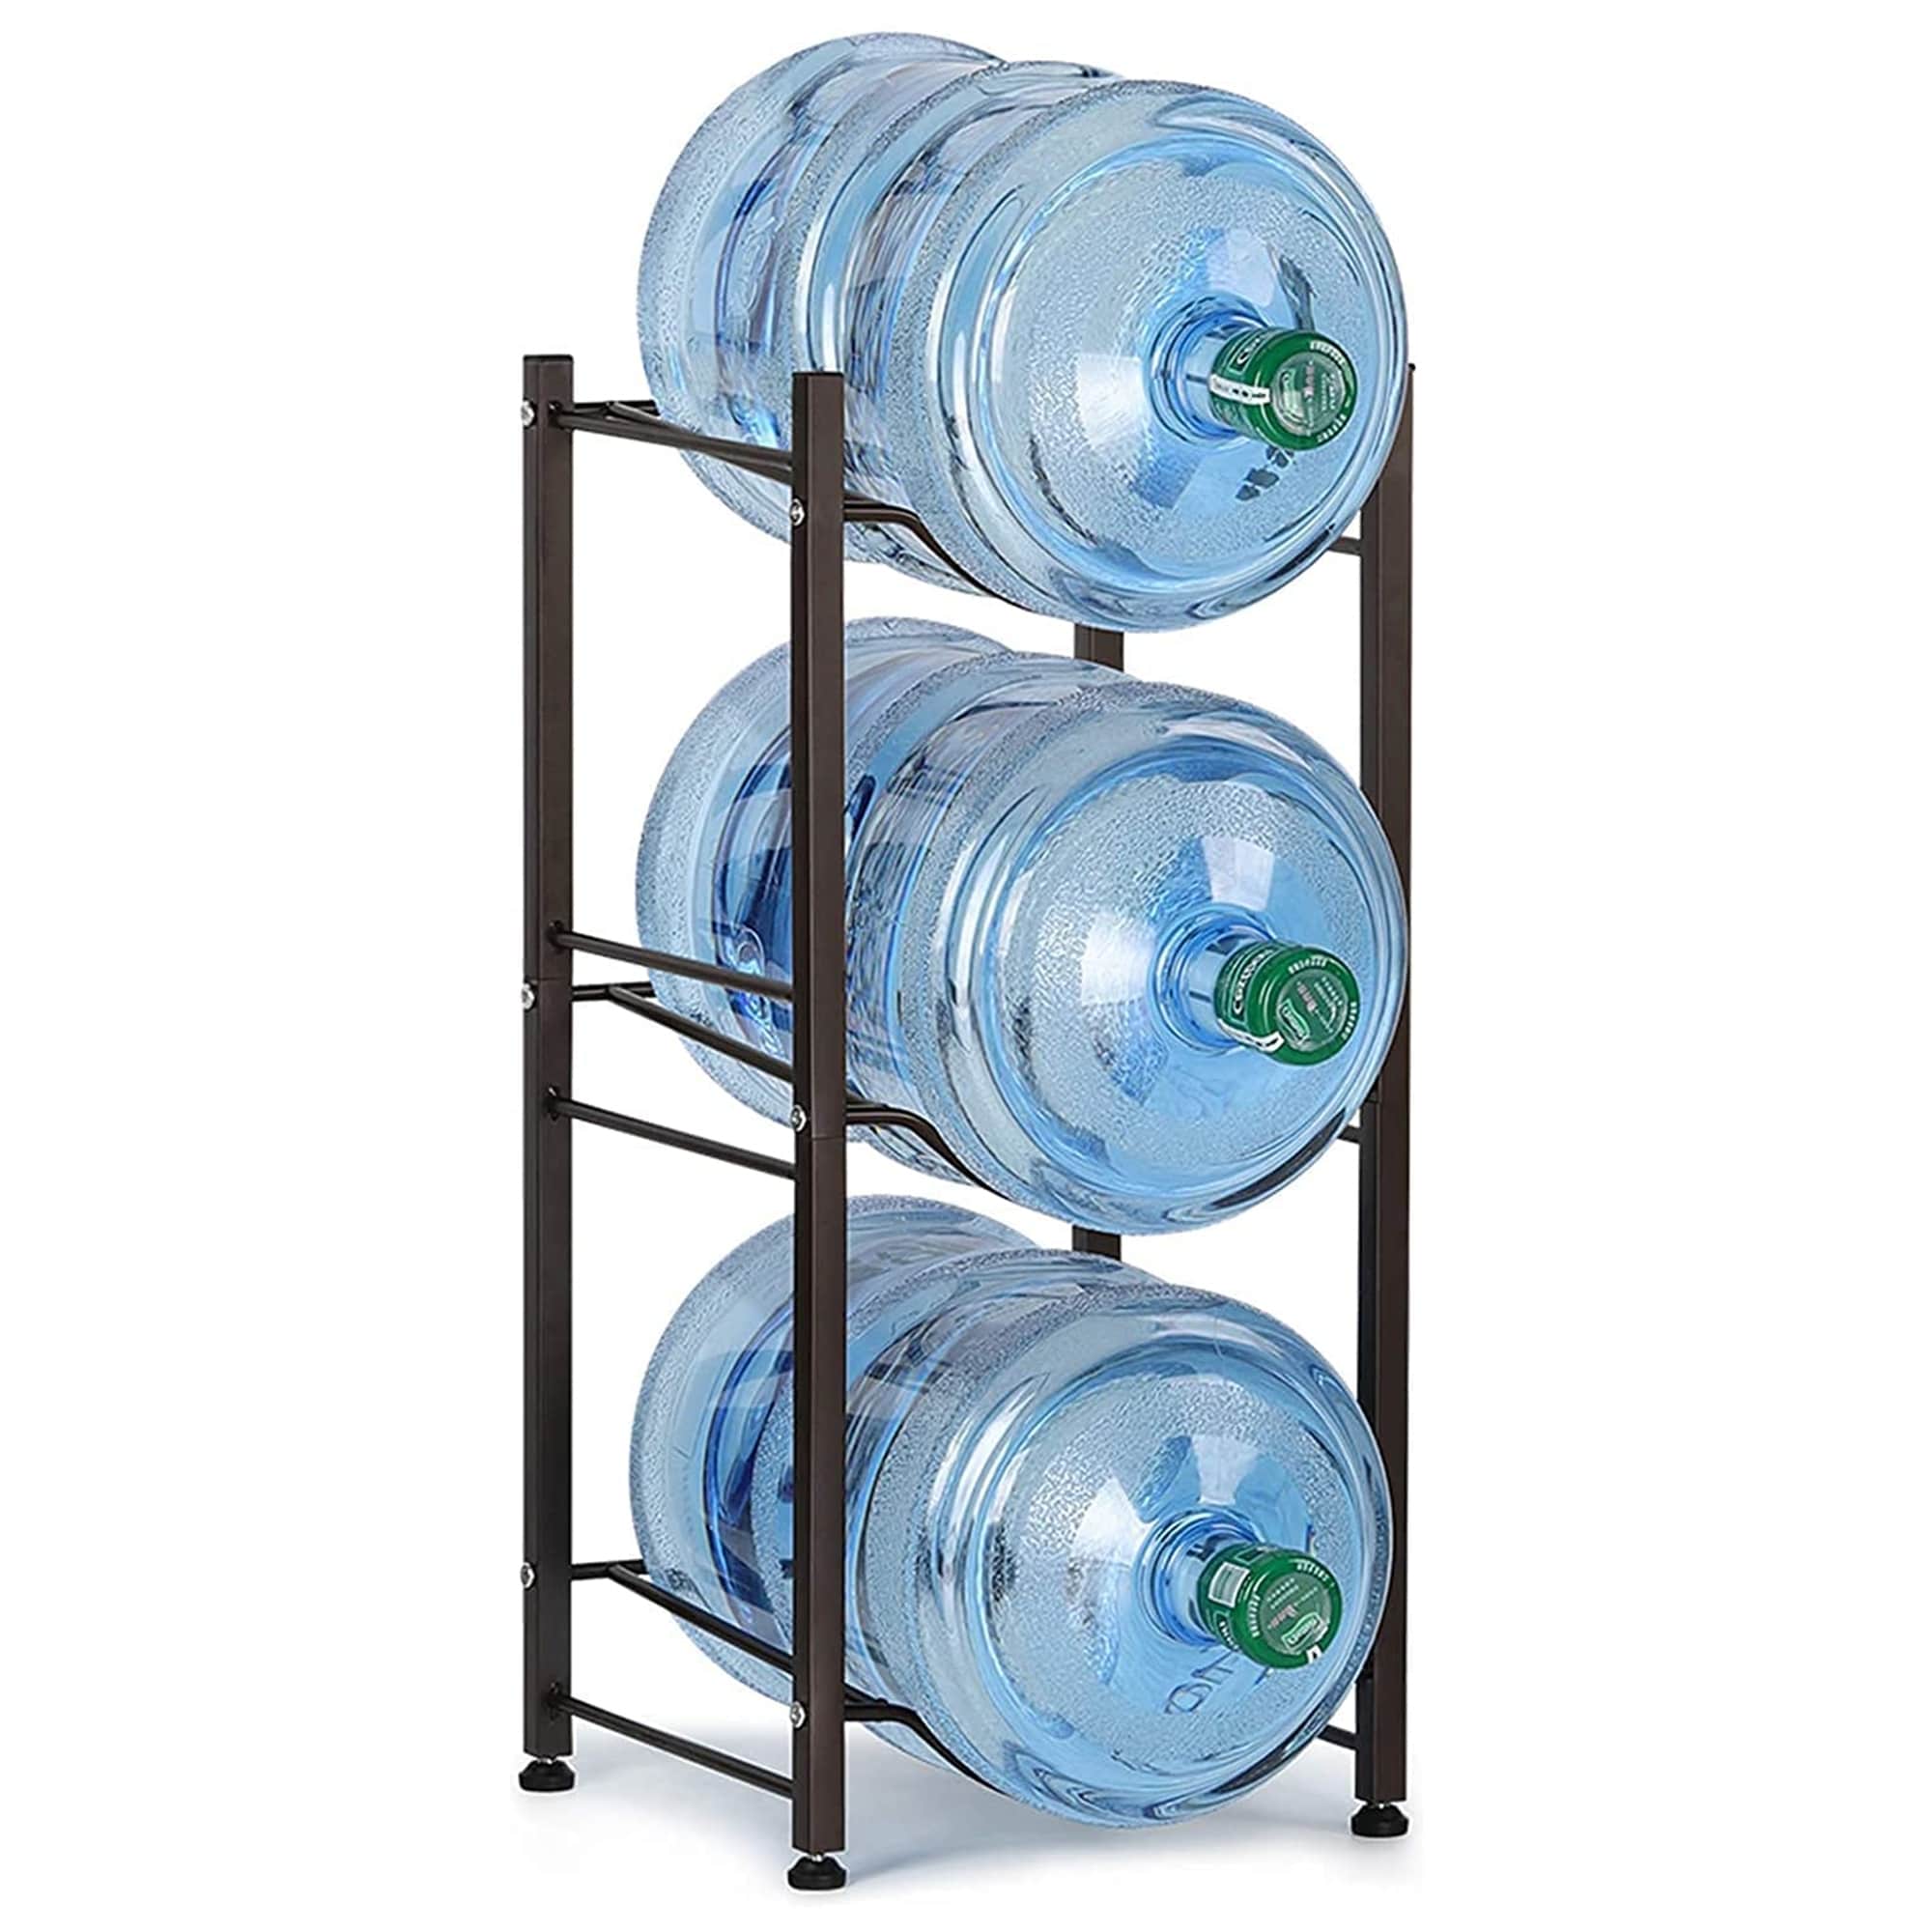 https://ak1.ostkcdn.com/images/products/is/images/direct/e7dc601ba851b612fb242b8d920ae5efcc75c349/5-Gallon-Water-Jug-Holder-Water-Bottle-Storage-Rack%2C-3-Tiers.jpg